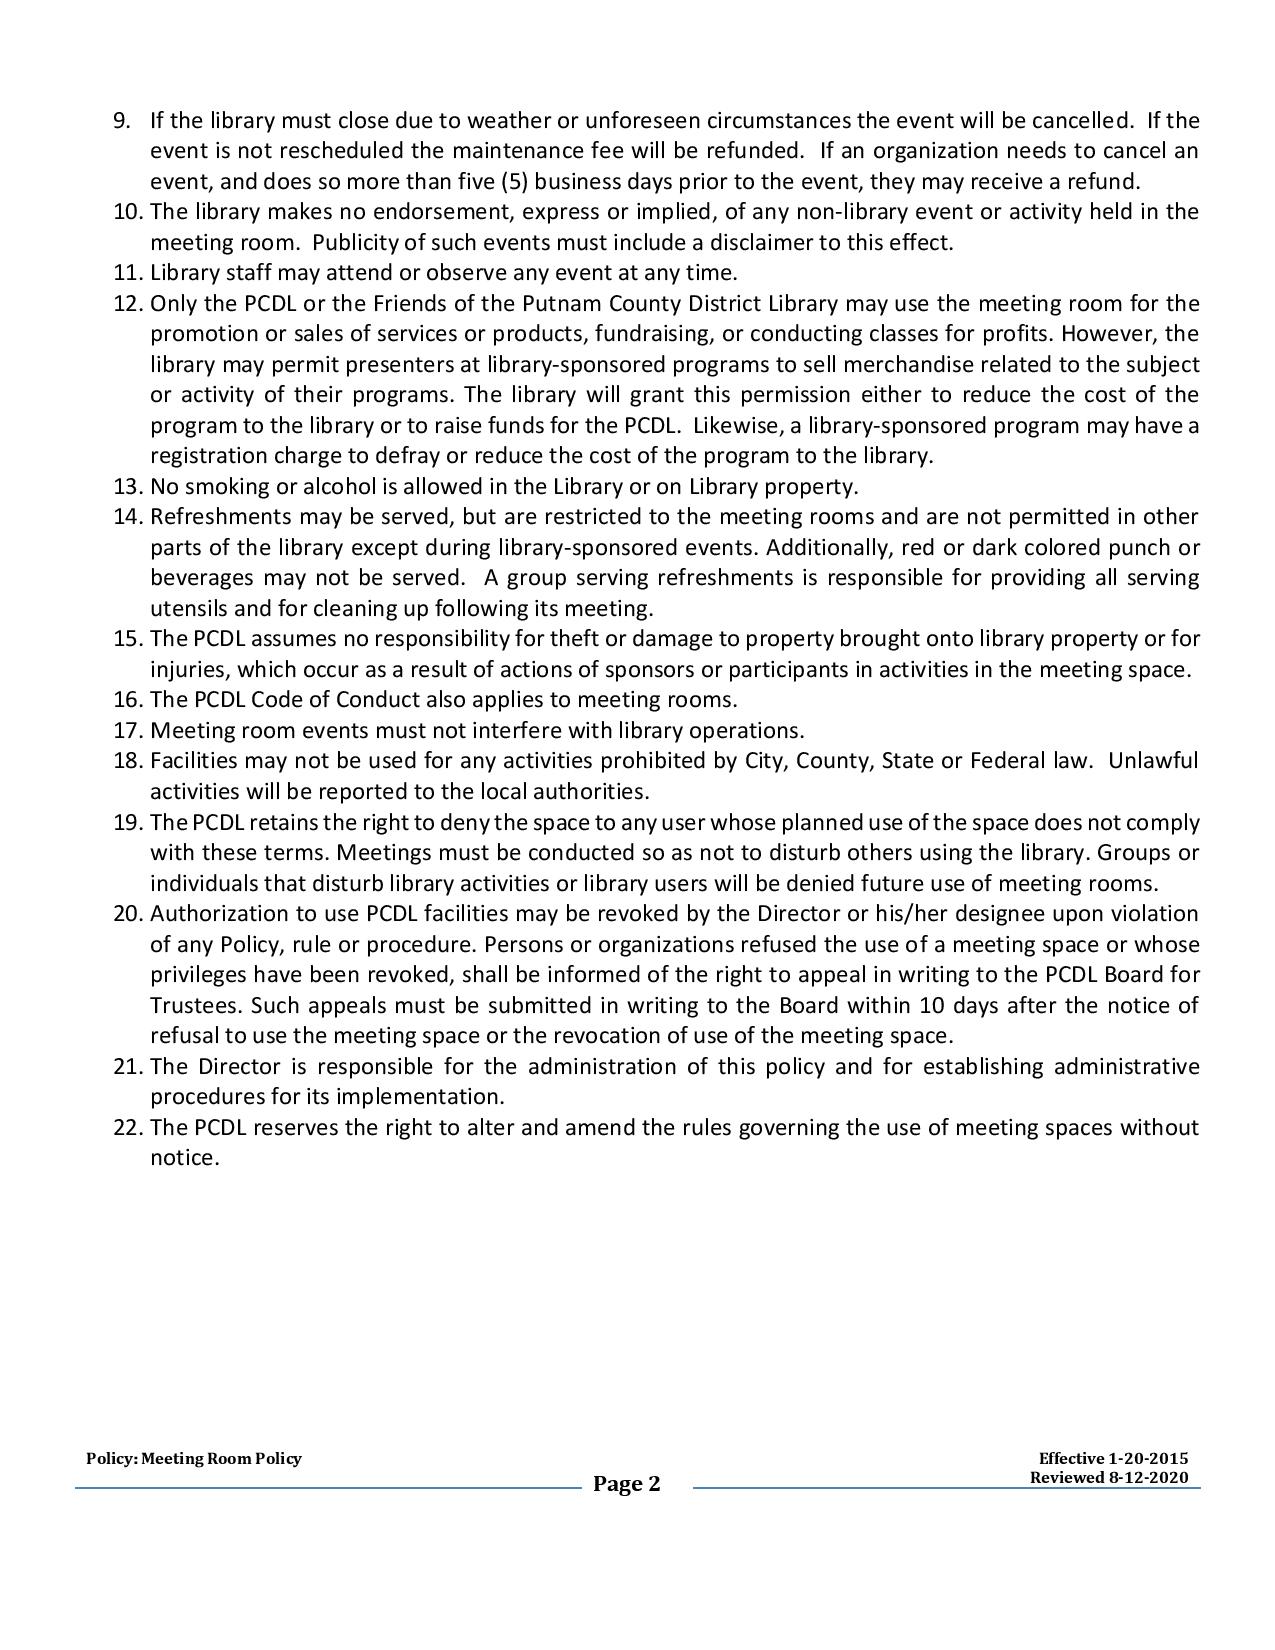 Meeting Room Policy page 2